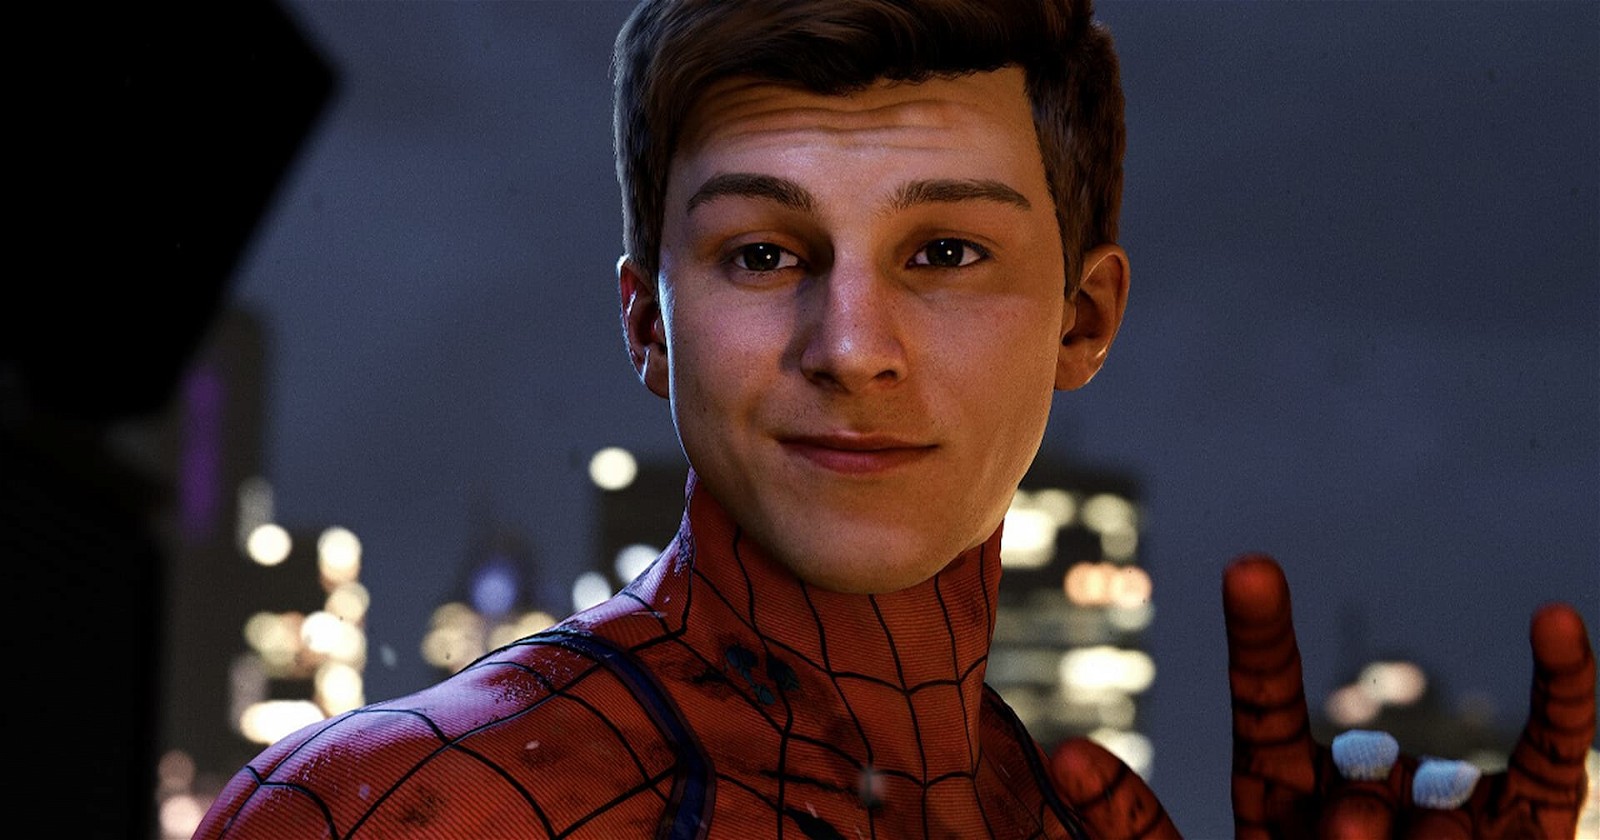 Marvel's Spider-Man 2 actor Yuri Lowenthal addressed the controversy and asked the fans to get over it